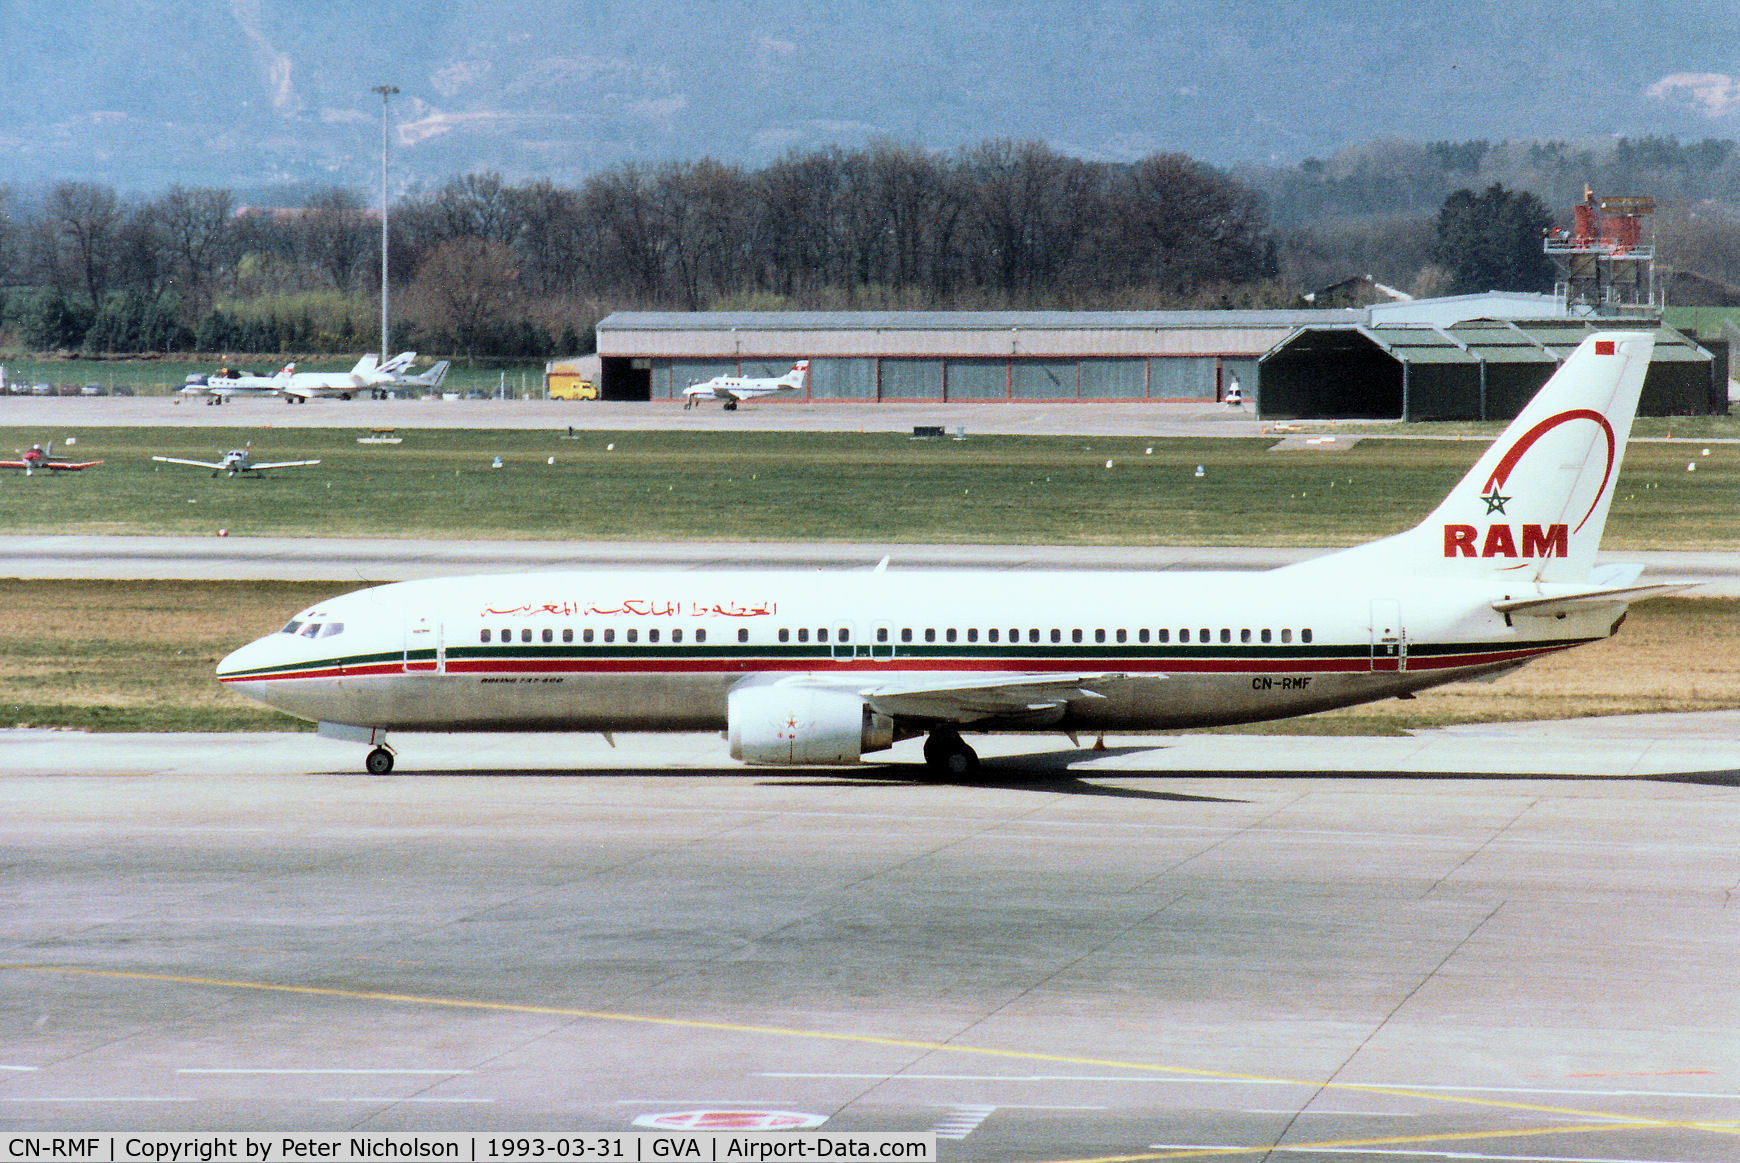 CN-RMF, 1990 Boeing 737-4B6 C/N 24807-1880, Boeing 737-4B6 of Royal Air Maroc taxying to the terminal at Geneva in March 1993.